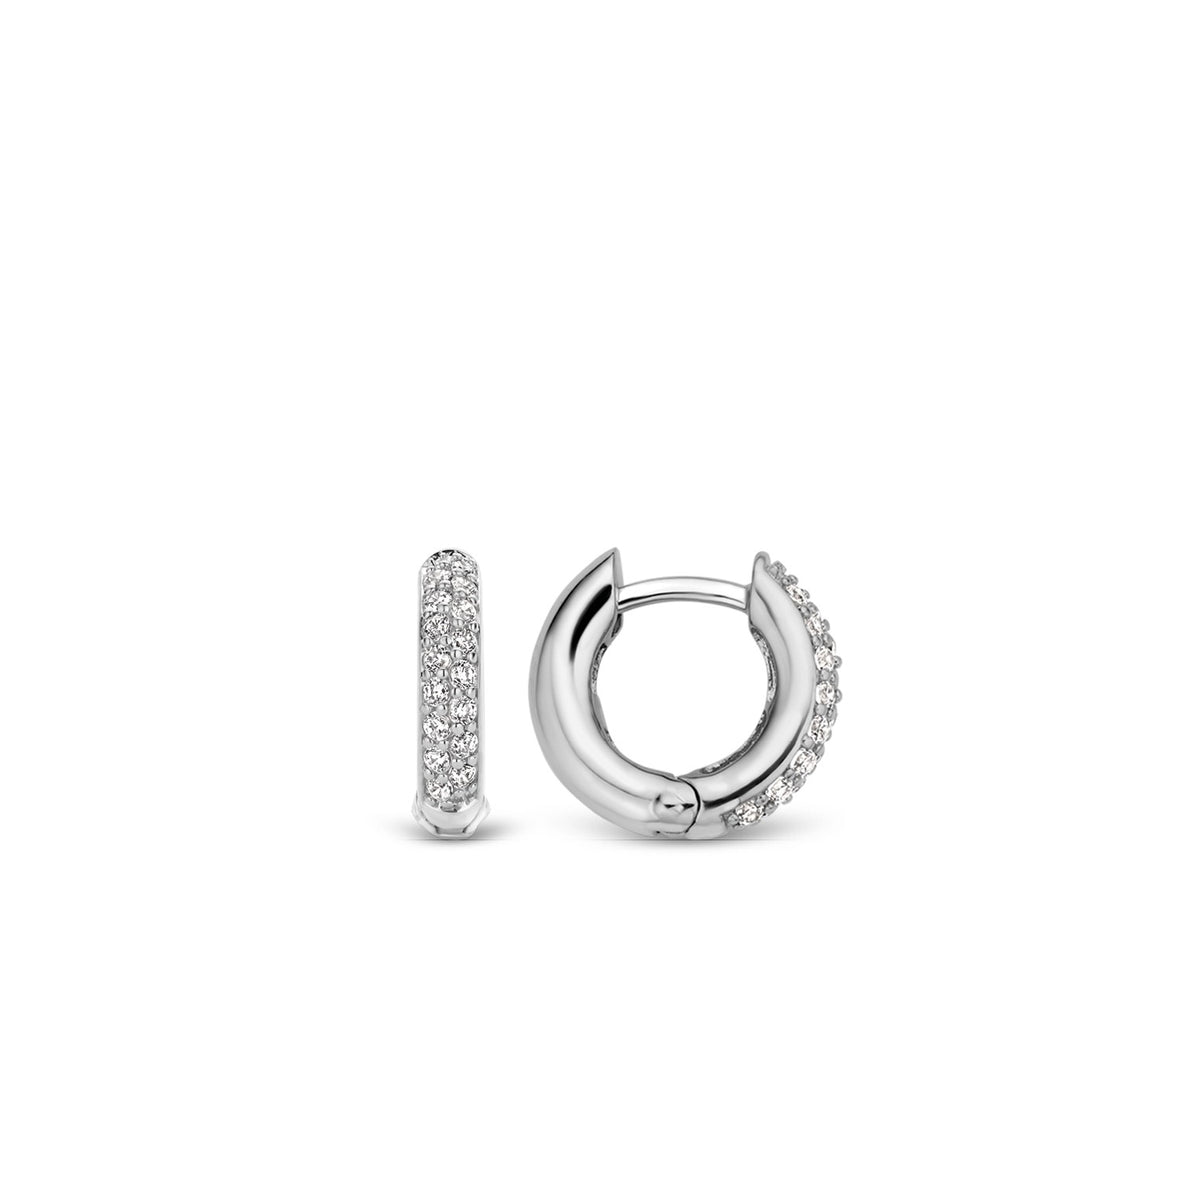 TI SENTO Sterling Silver Two Row Pave Set Cubic Zirconia Huggie Earrings